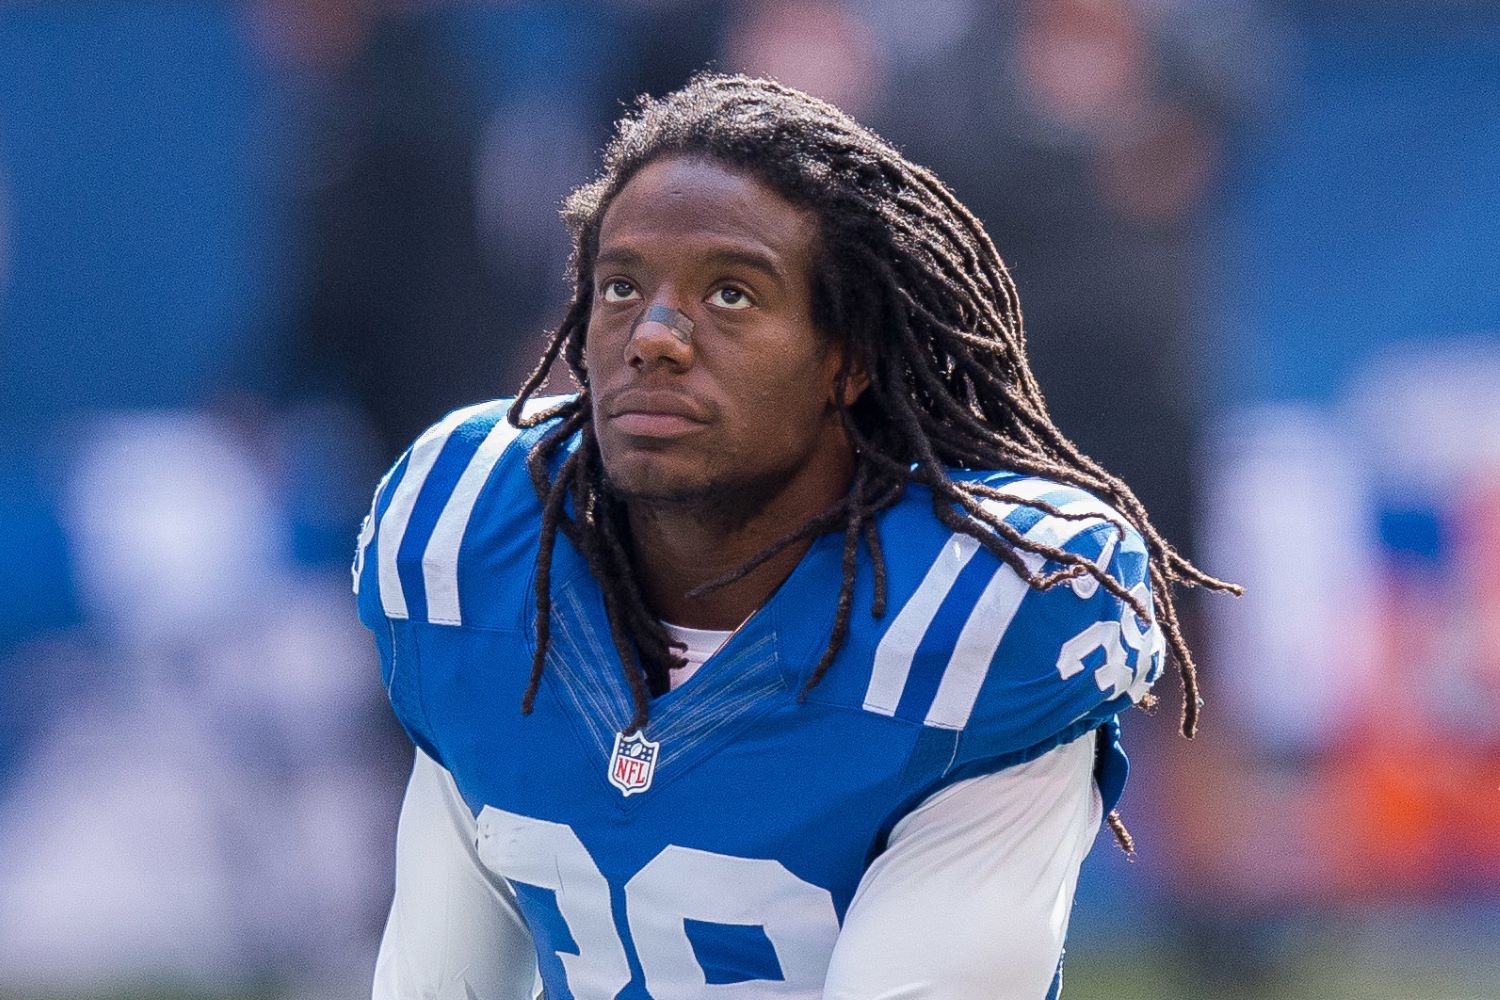 Sergio Brown Set To Face Murder And Concealment Of Dead Body Charges In Illinois